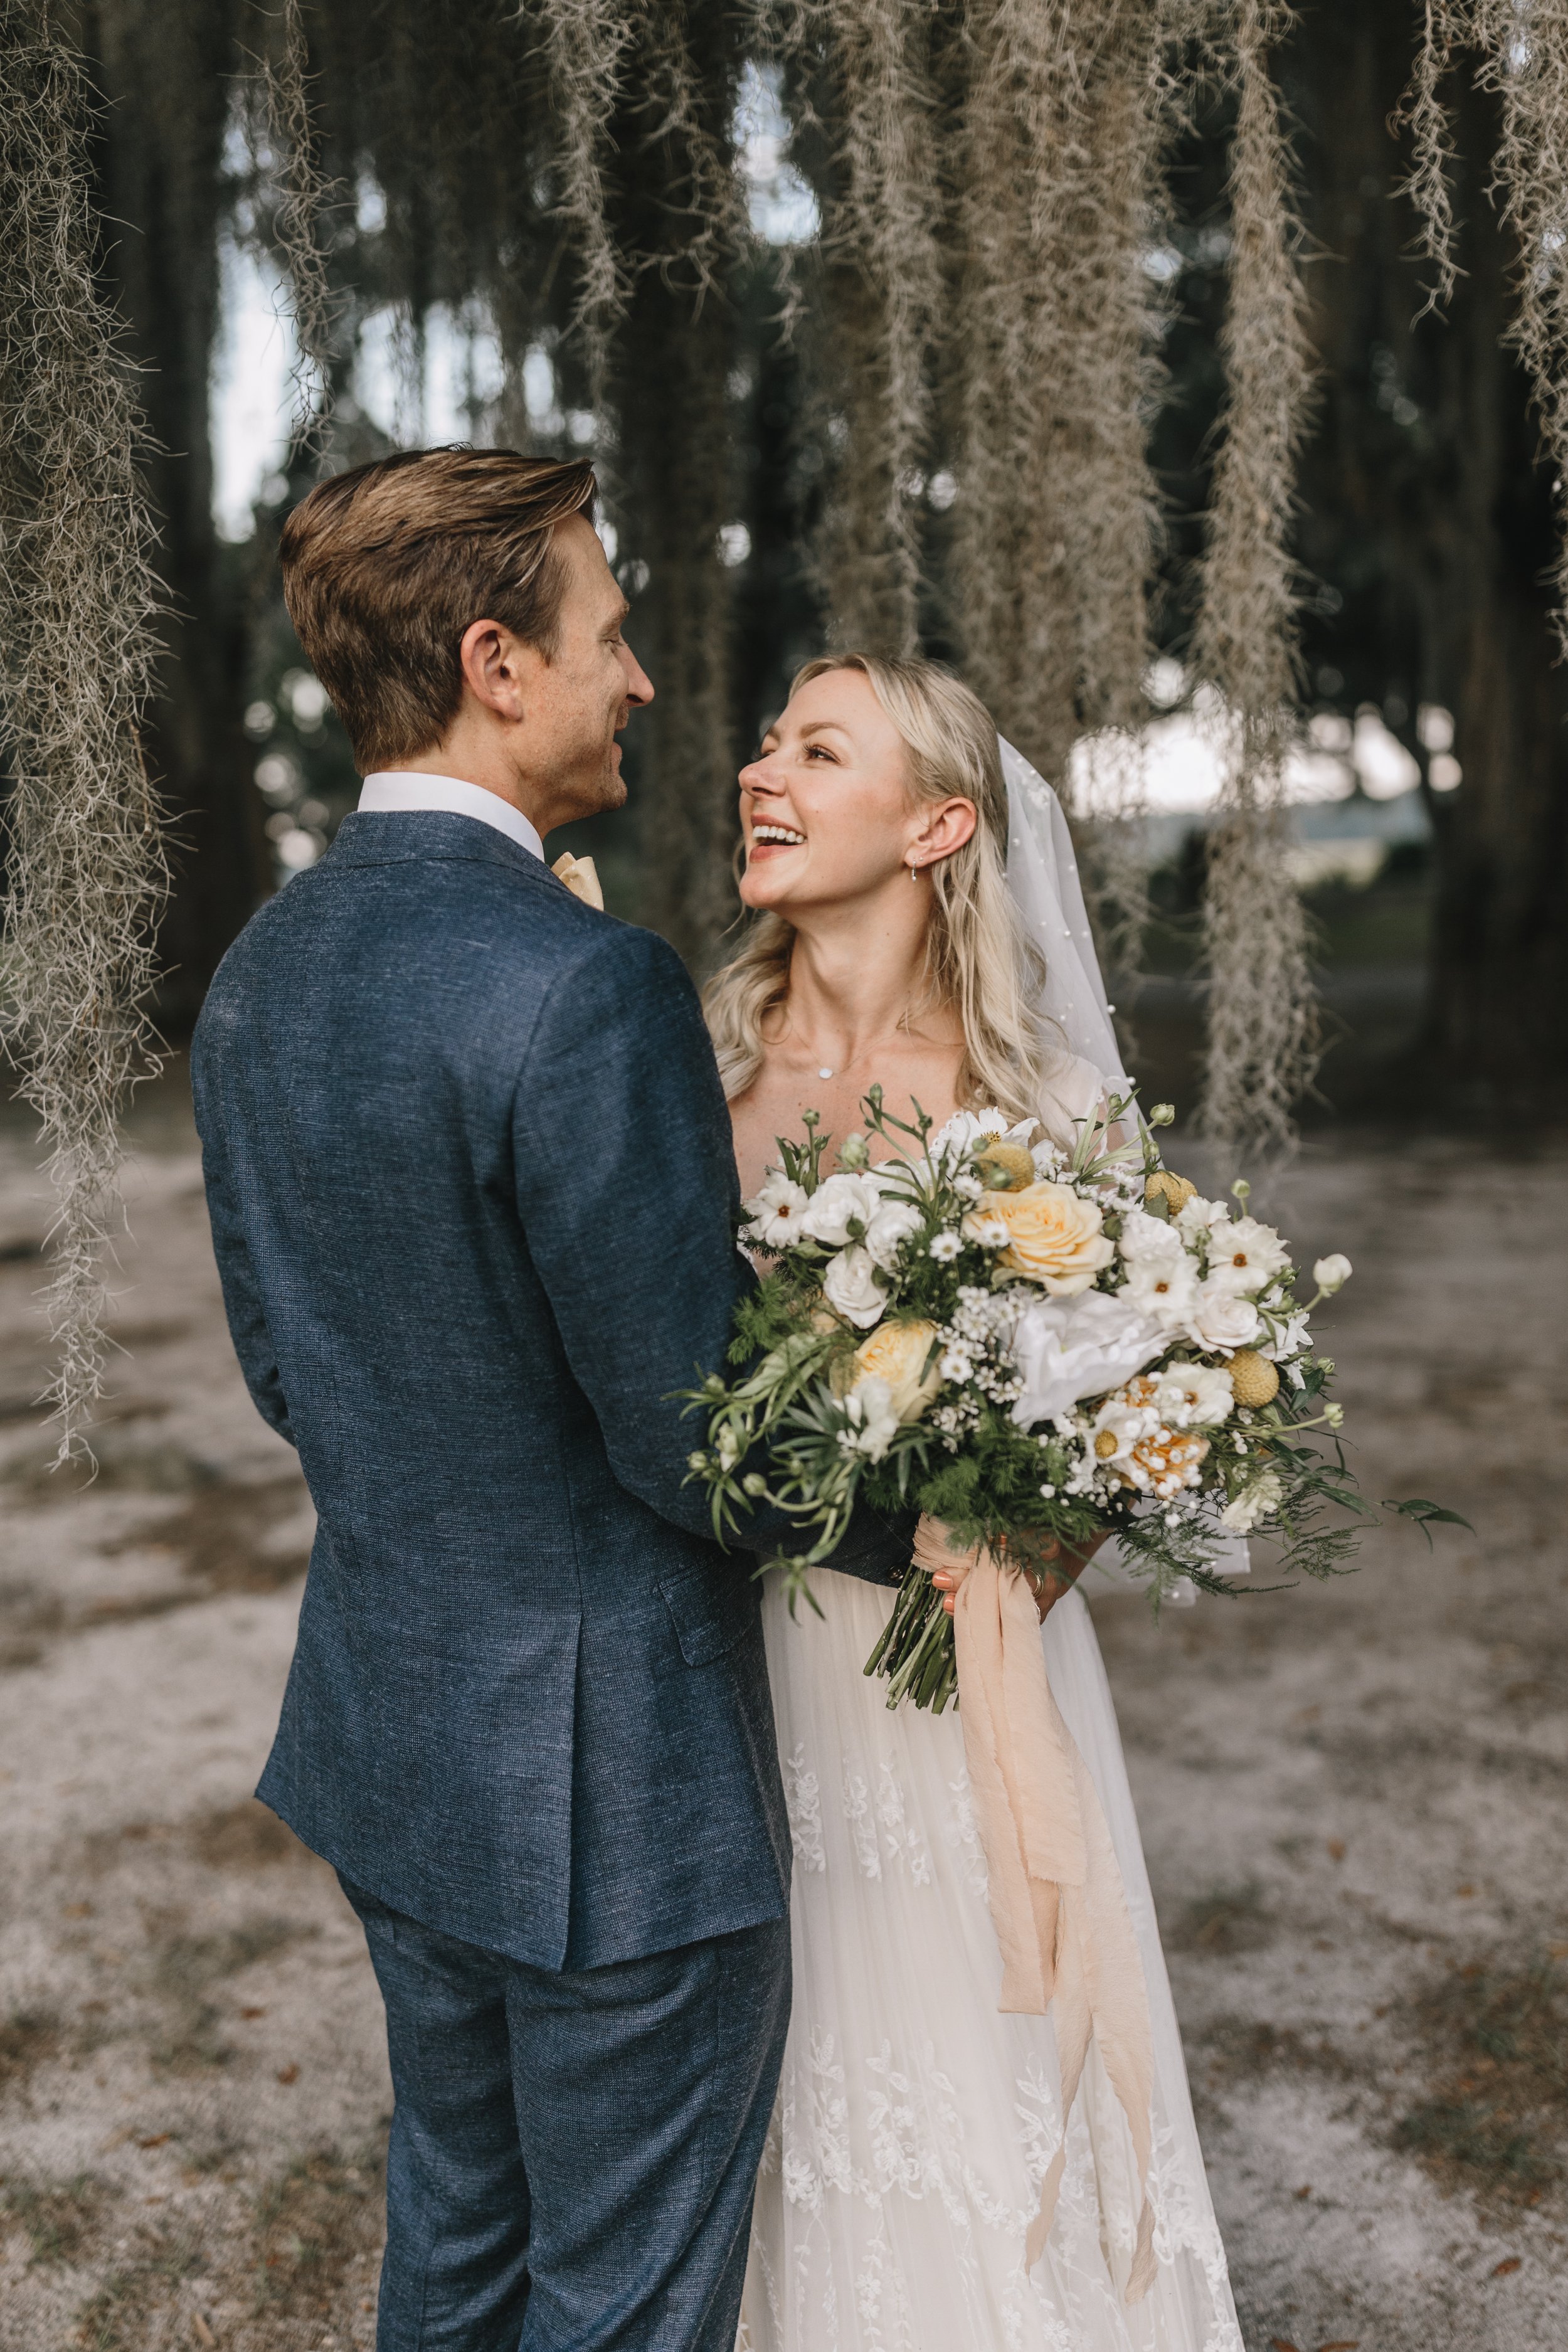 ivory-and-beau-wedding-and-florals-southern-wedding-savannah-florist-savannah-wedding-savannah-wedding-planner-the-wyld-dock-bar-historic-savannah-georgia-wedding-flowers-wedding-blog-wedding-inspiration-LAUREN+NICK_WEDDING-586.jpg